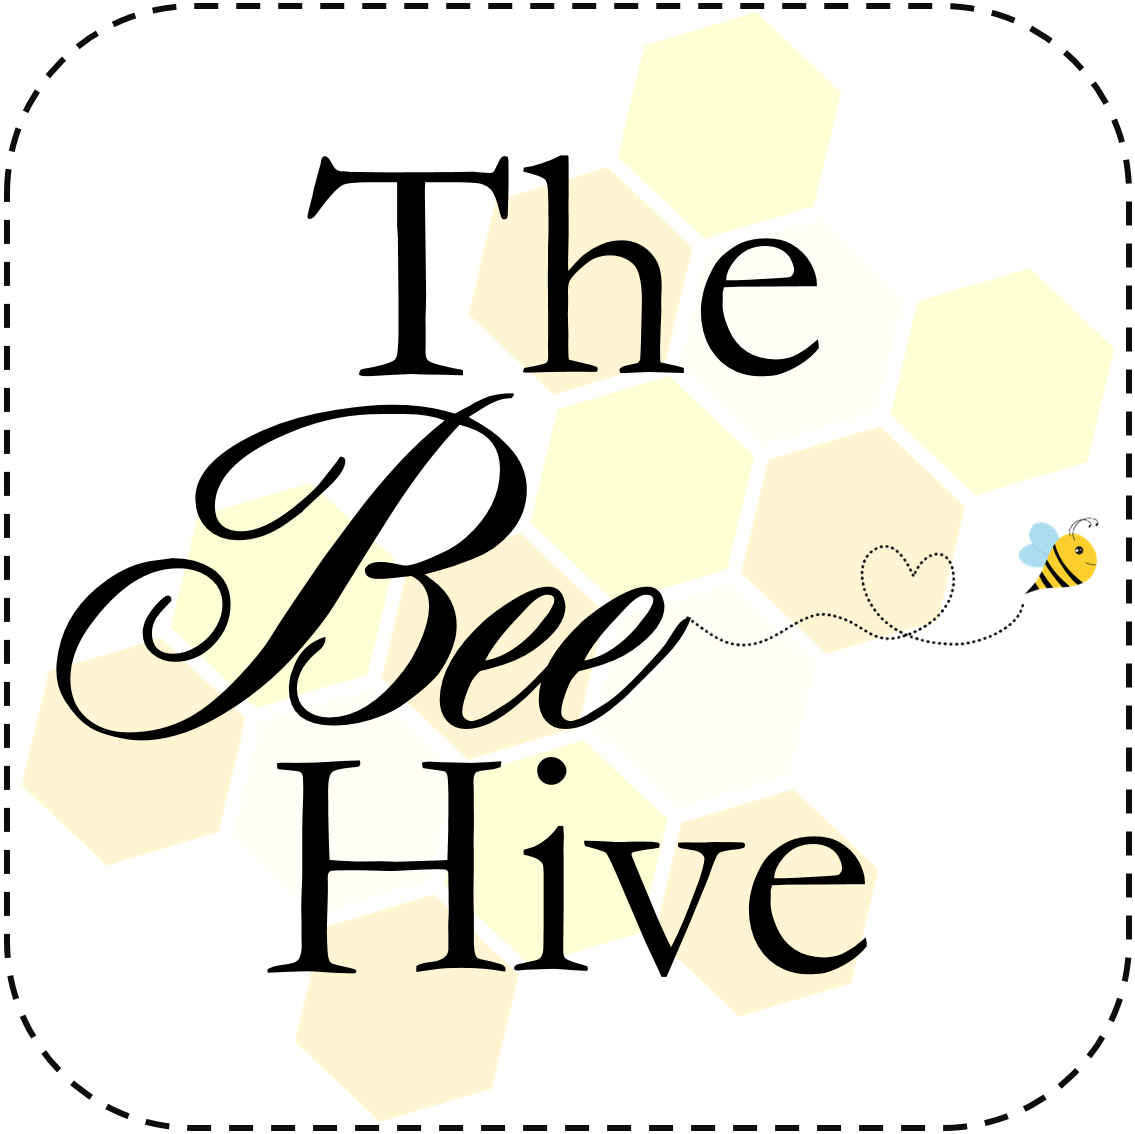 The Bee Hive